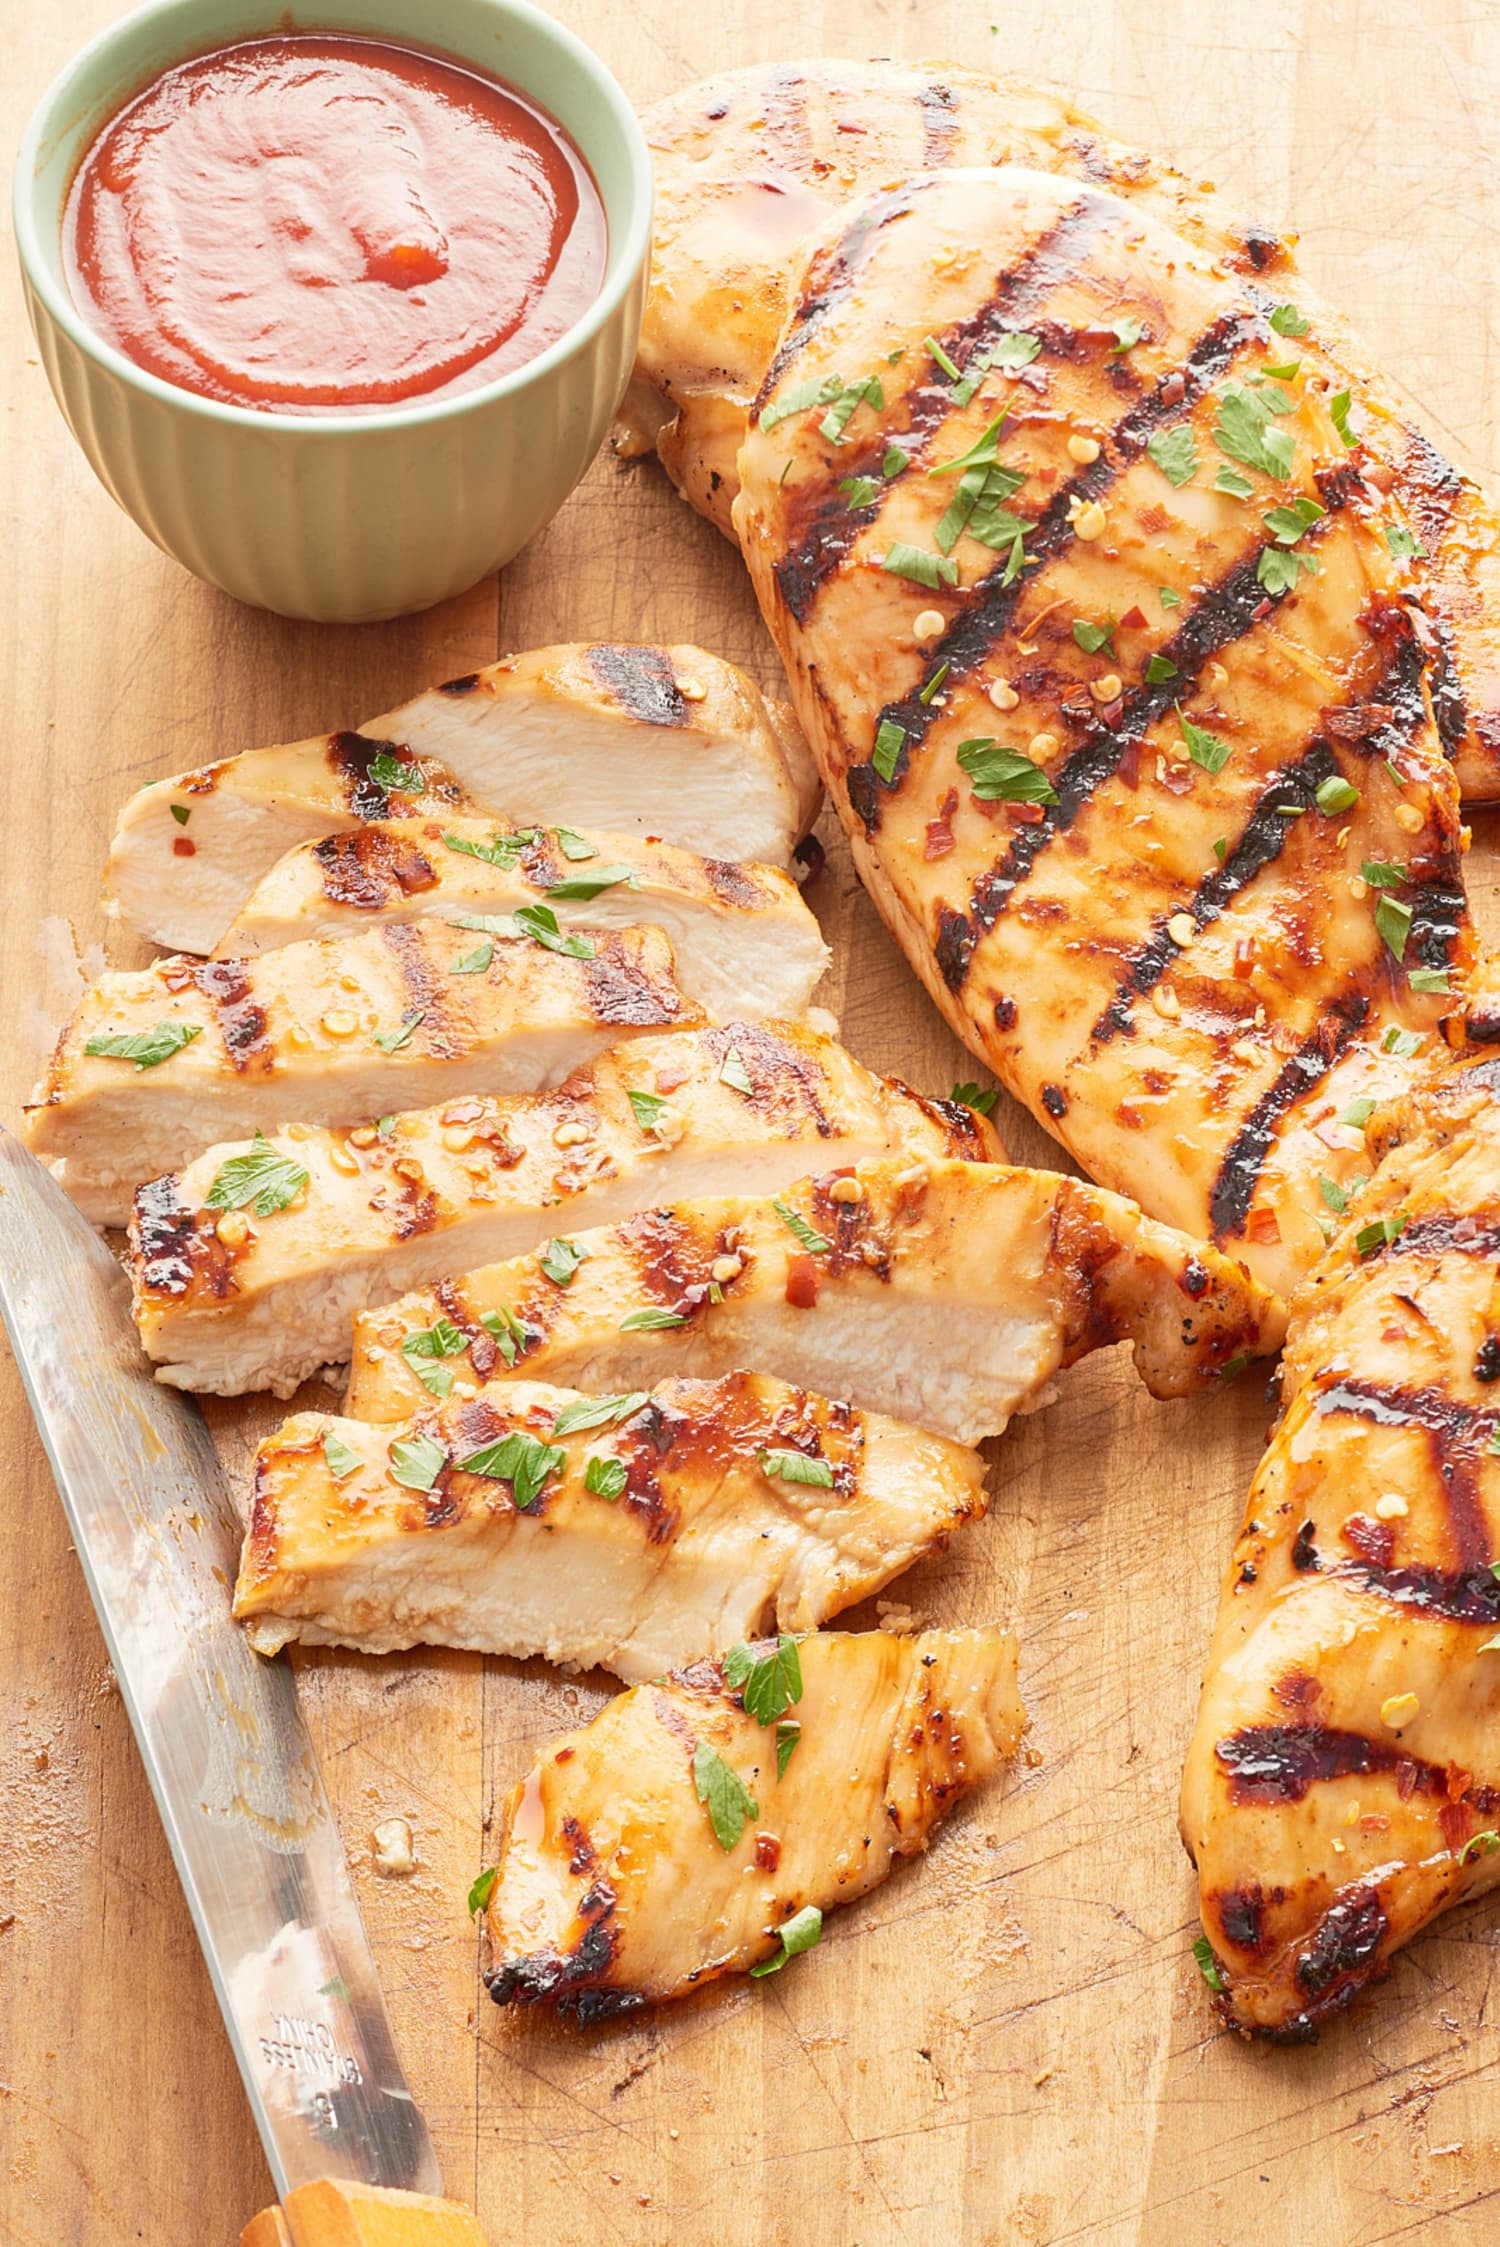 Grilling Chicken Breasts
 How To Make Juicy Flavorful Grilled Chicken Breast